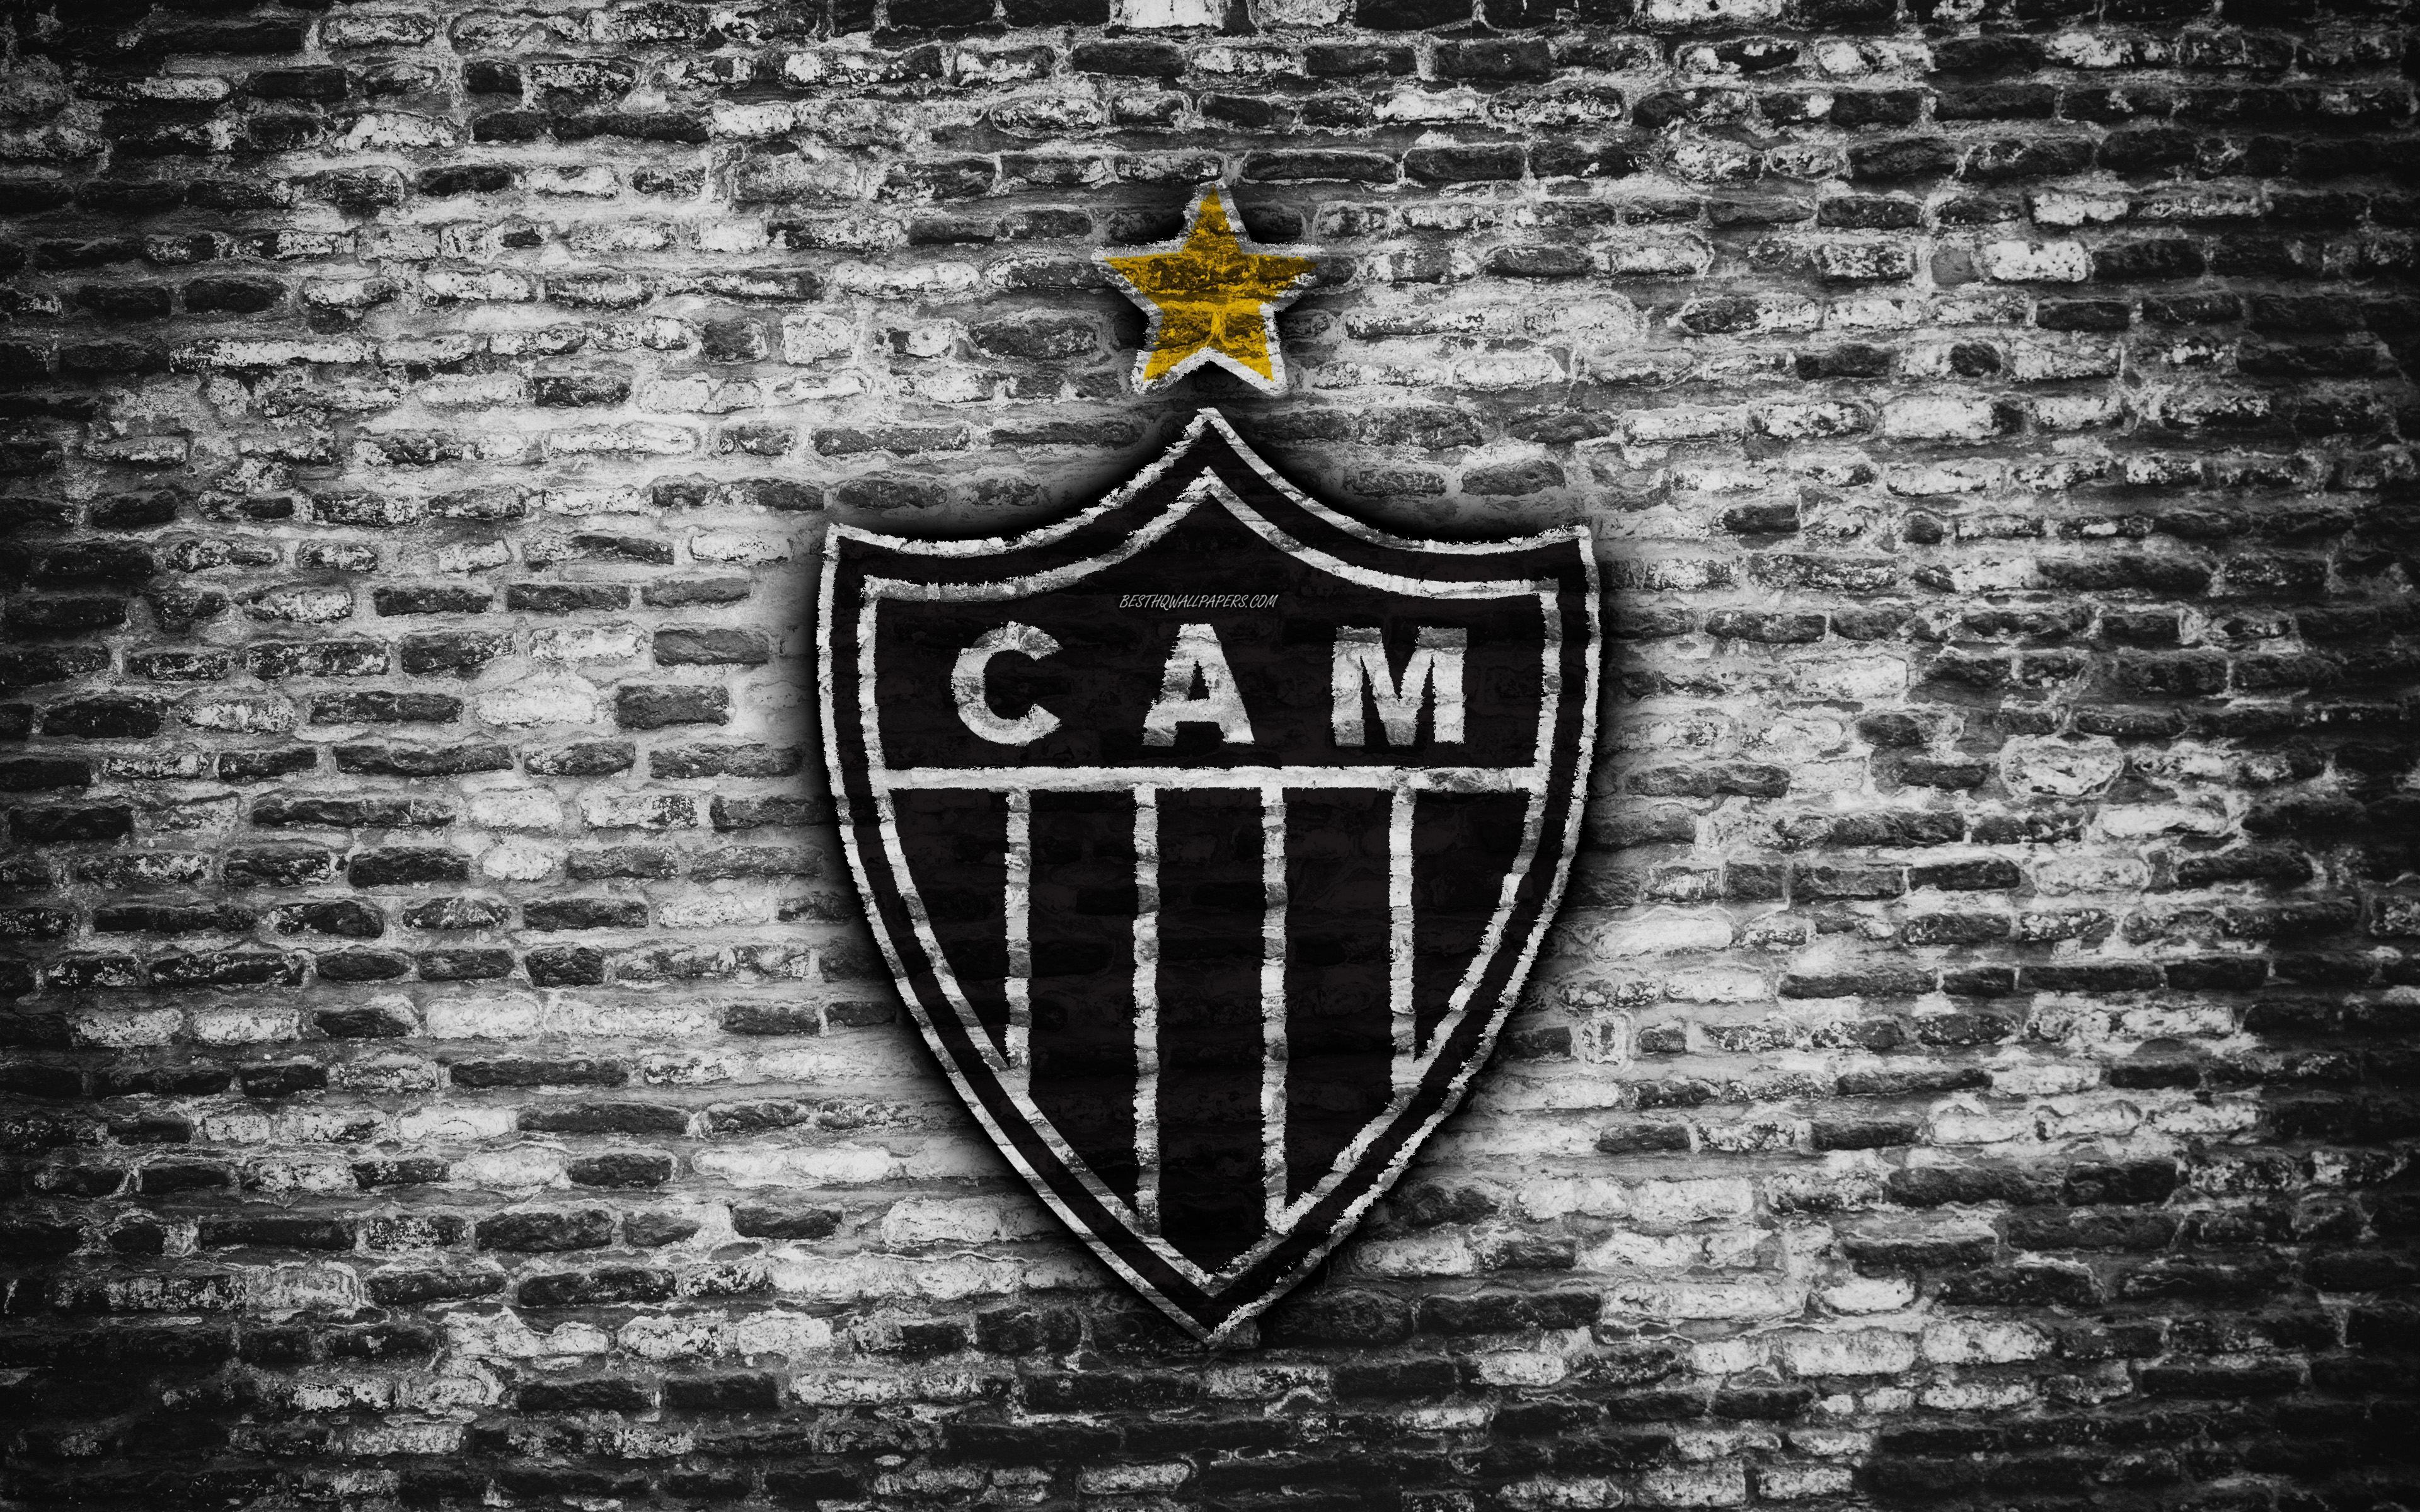 Clube Atletico Mineiro Wallpapers